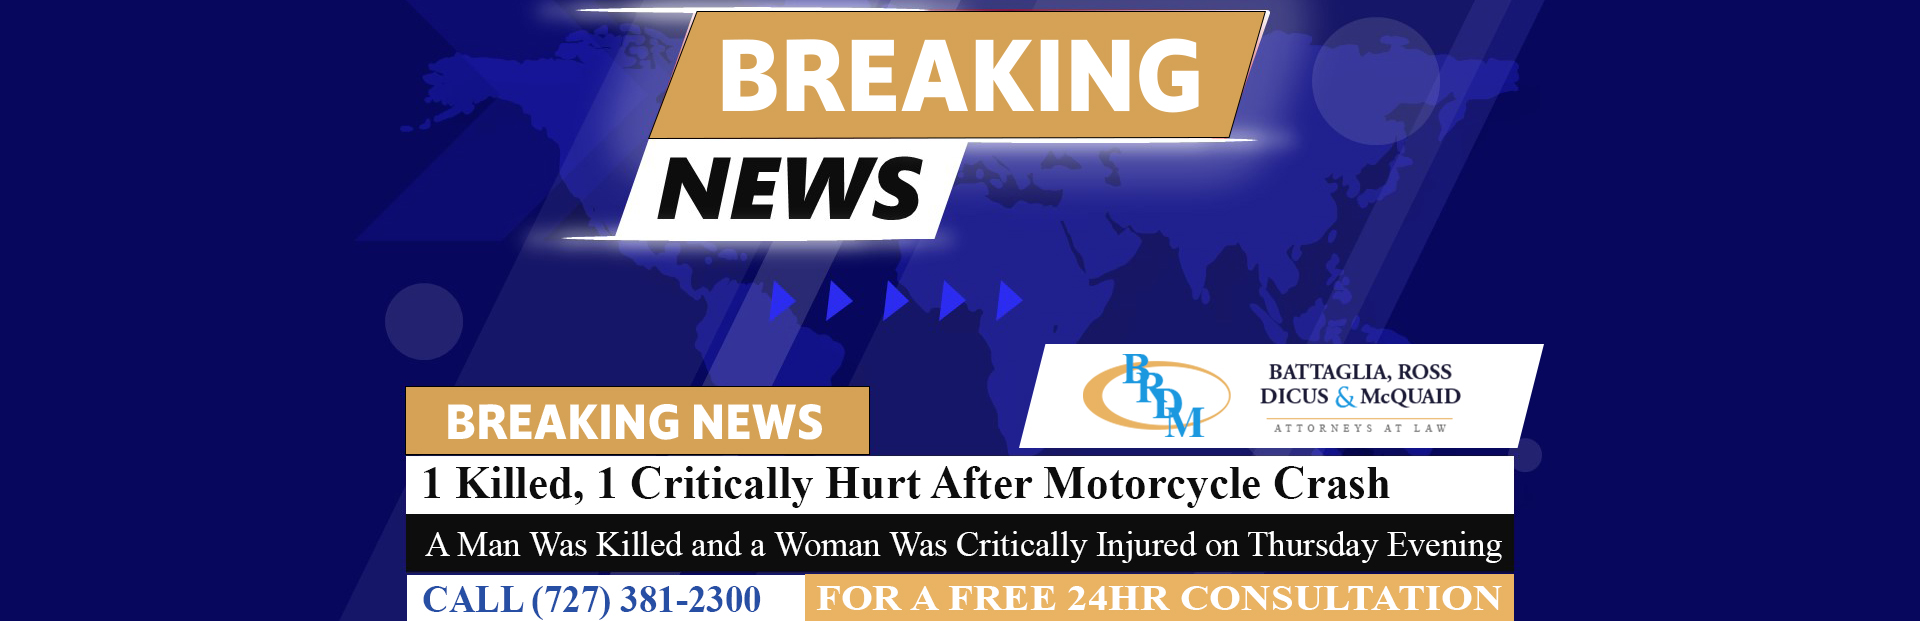 [01-21-23] 1 Killed, 1 Critically Hurt After Motorcycle Crash in Largo